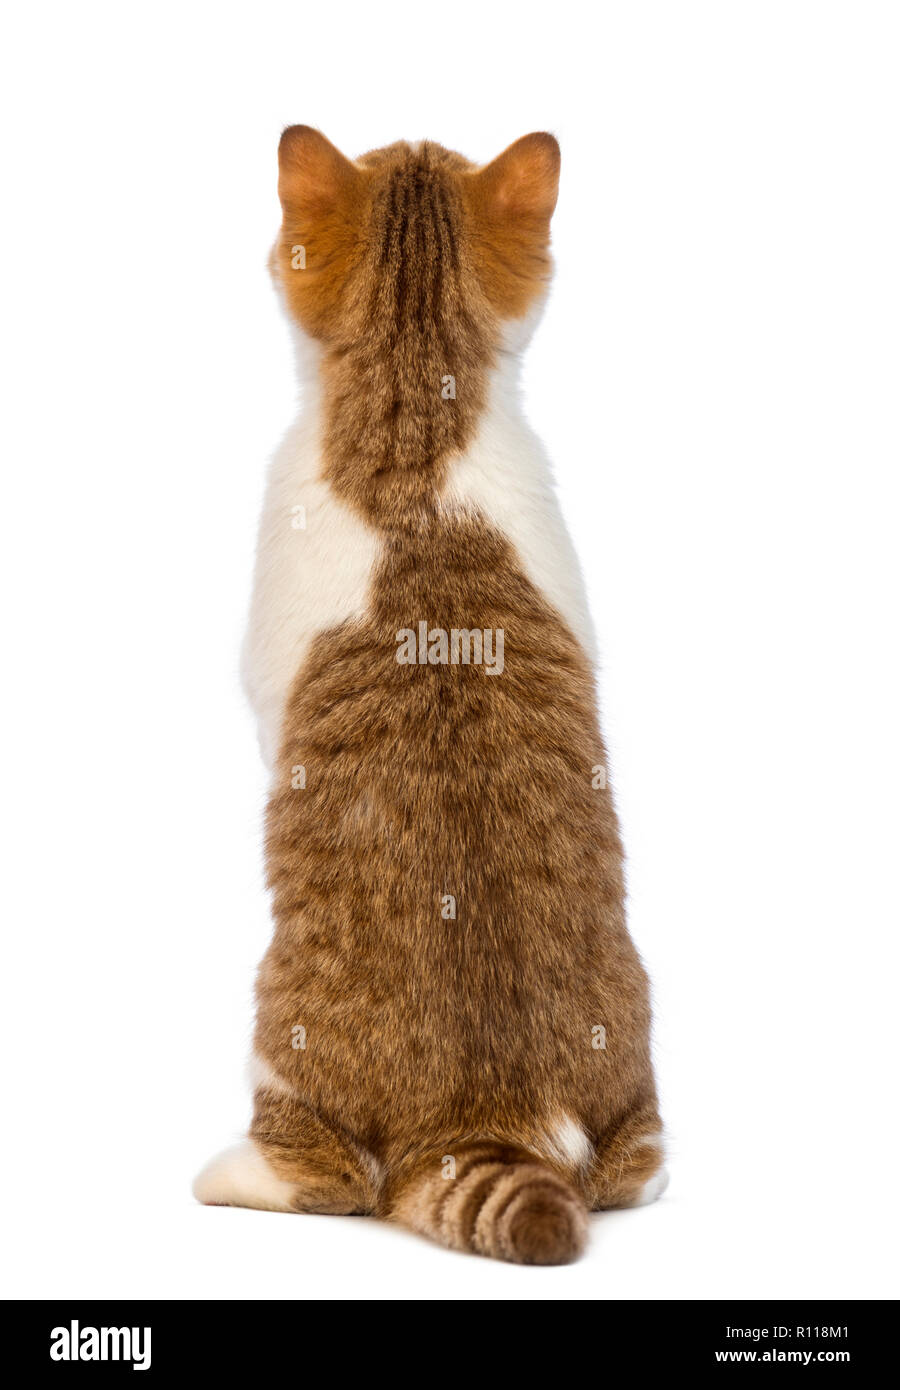 Rear view of a British Shorthair kitten, 3.5 months old, standing on hind legs and looking up in front of white background Stock Photo